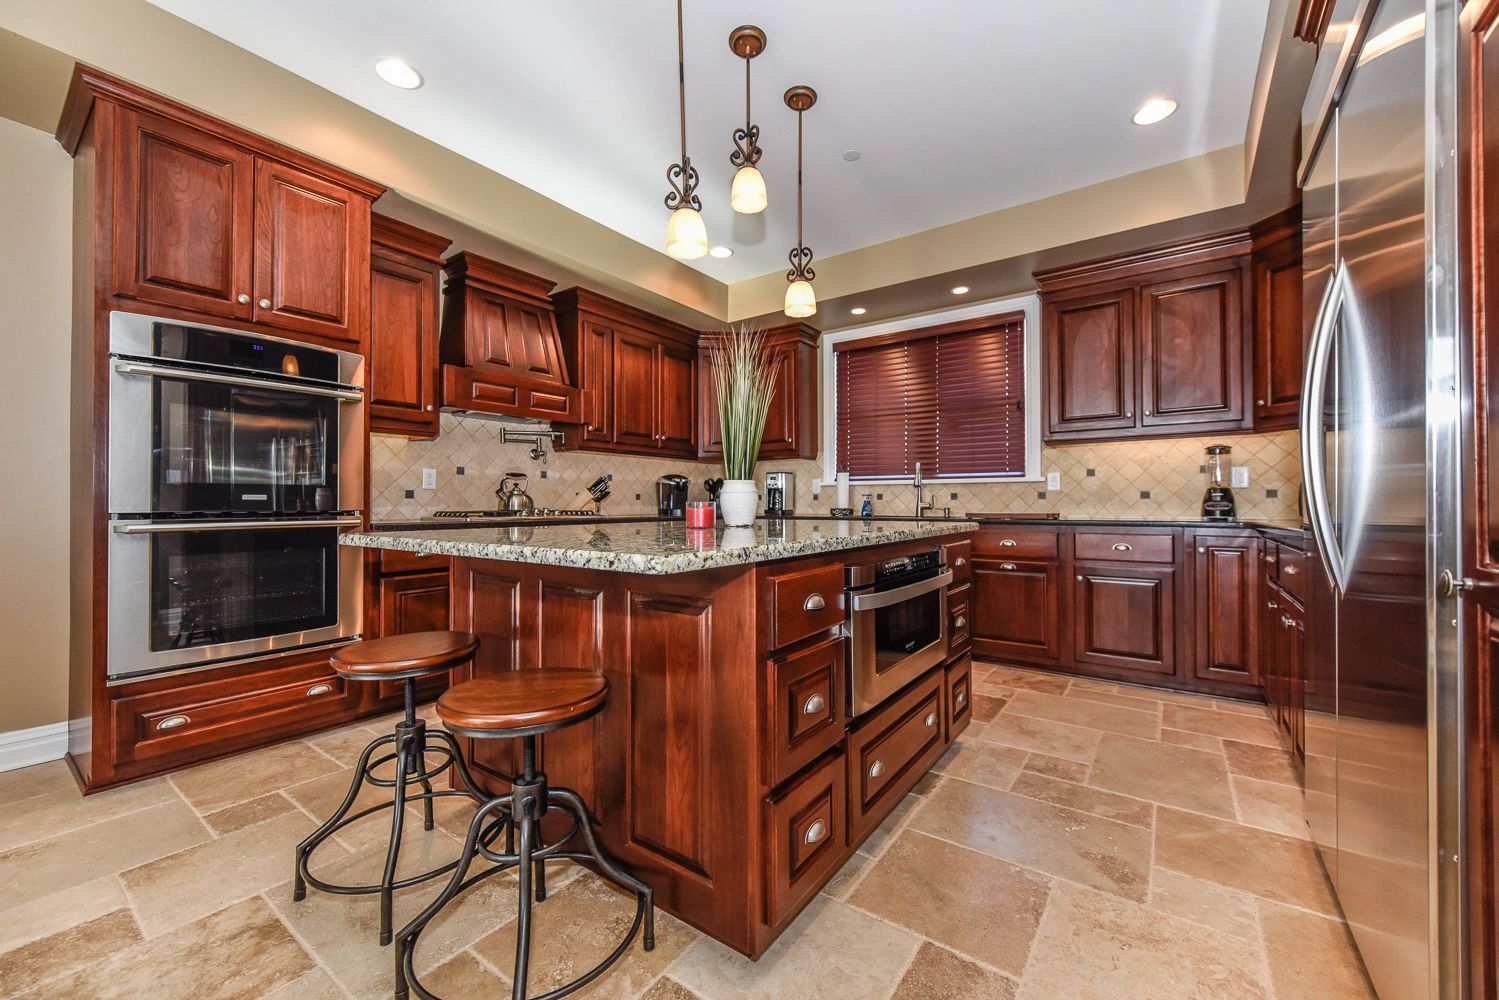 Kitchen with stainless steel appliances, custom cabinetry, granite counter tops.